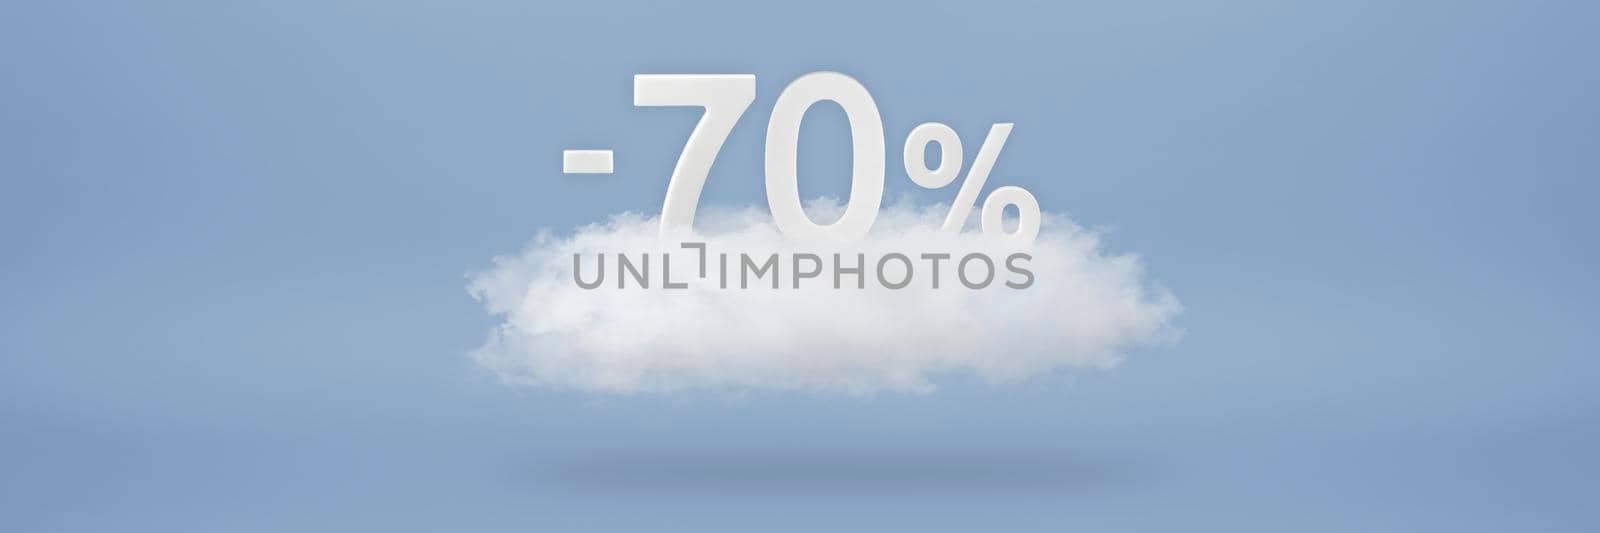 Discount 70 percent. Big discounts, sale up to seventy percent. 3D numbers float on a cloud on a blue background. Copy space. Advertising banner and poster to be inserted into the project.